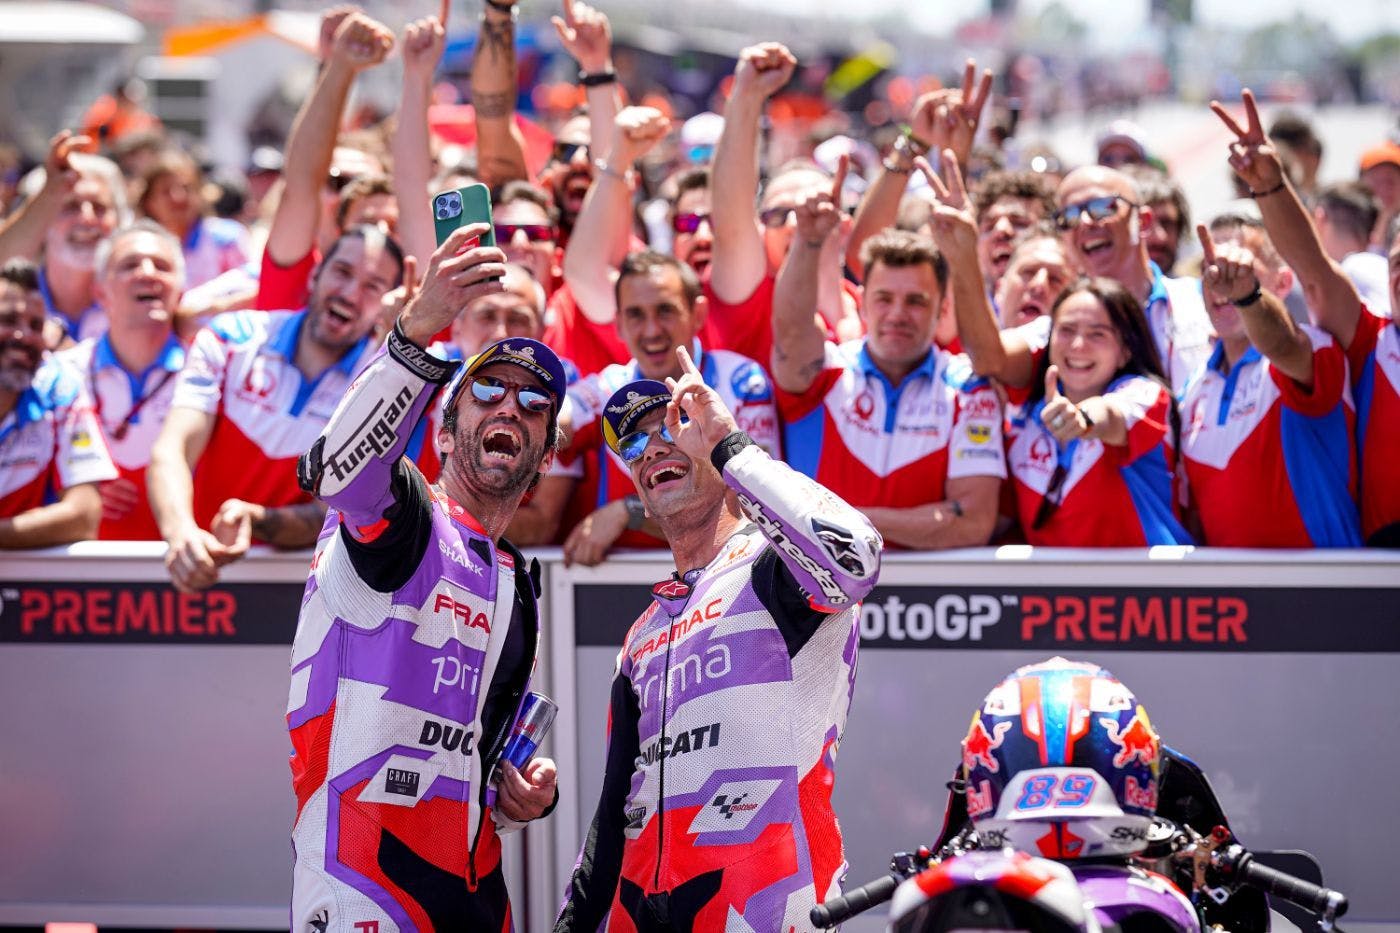 featured image - Kyrrex Supported the Pramac Racing Team During Its First Double Podium in 2022